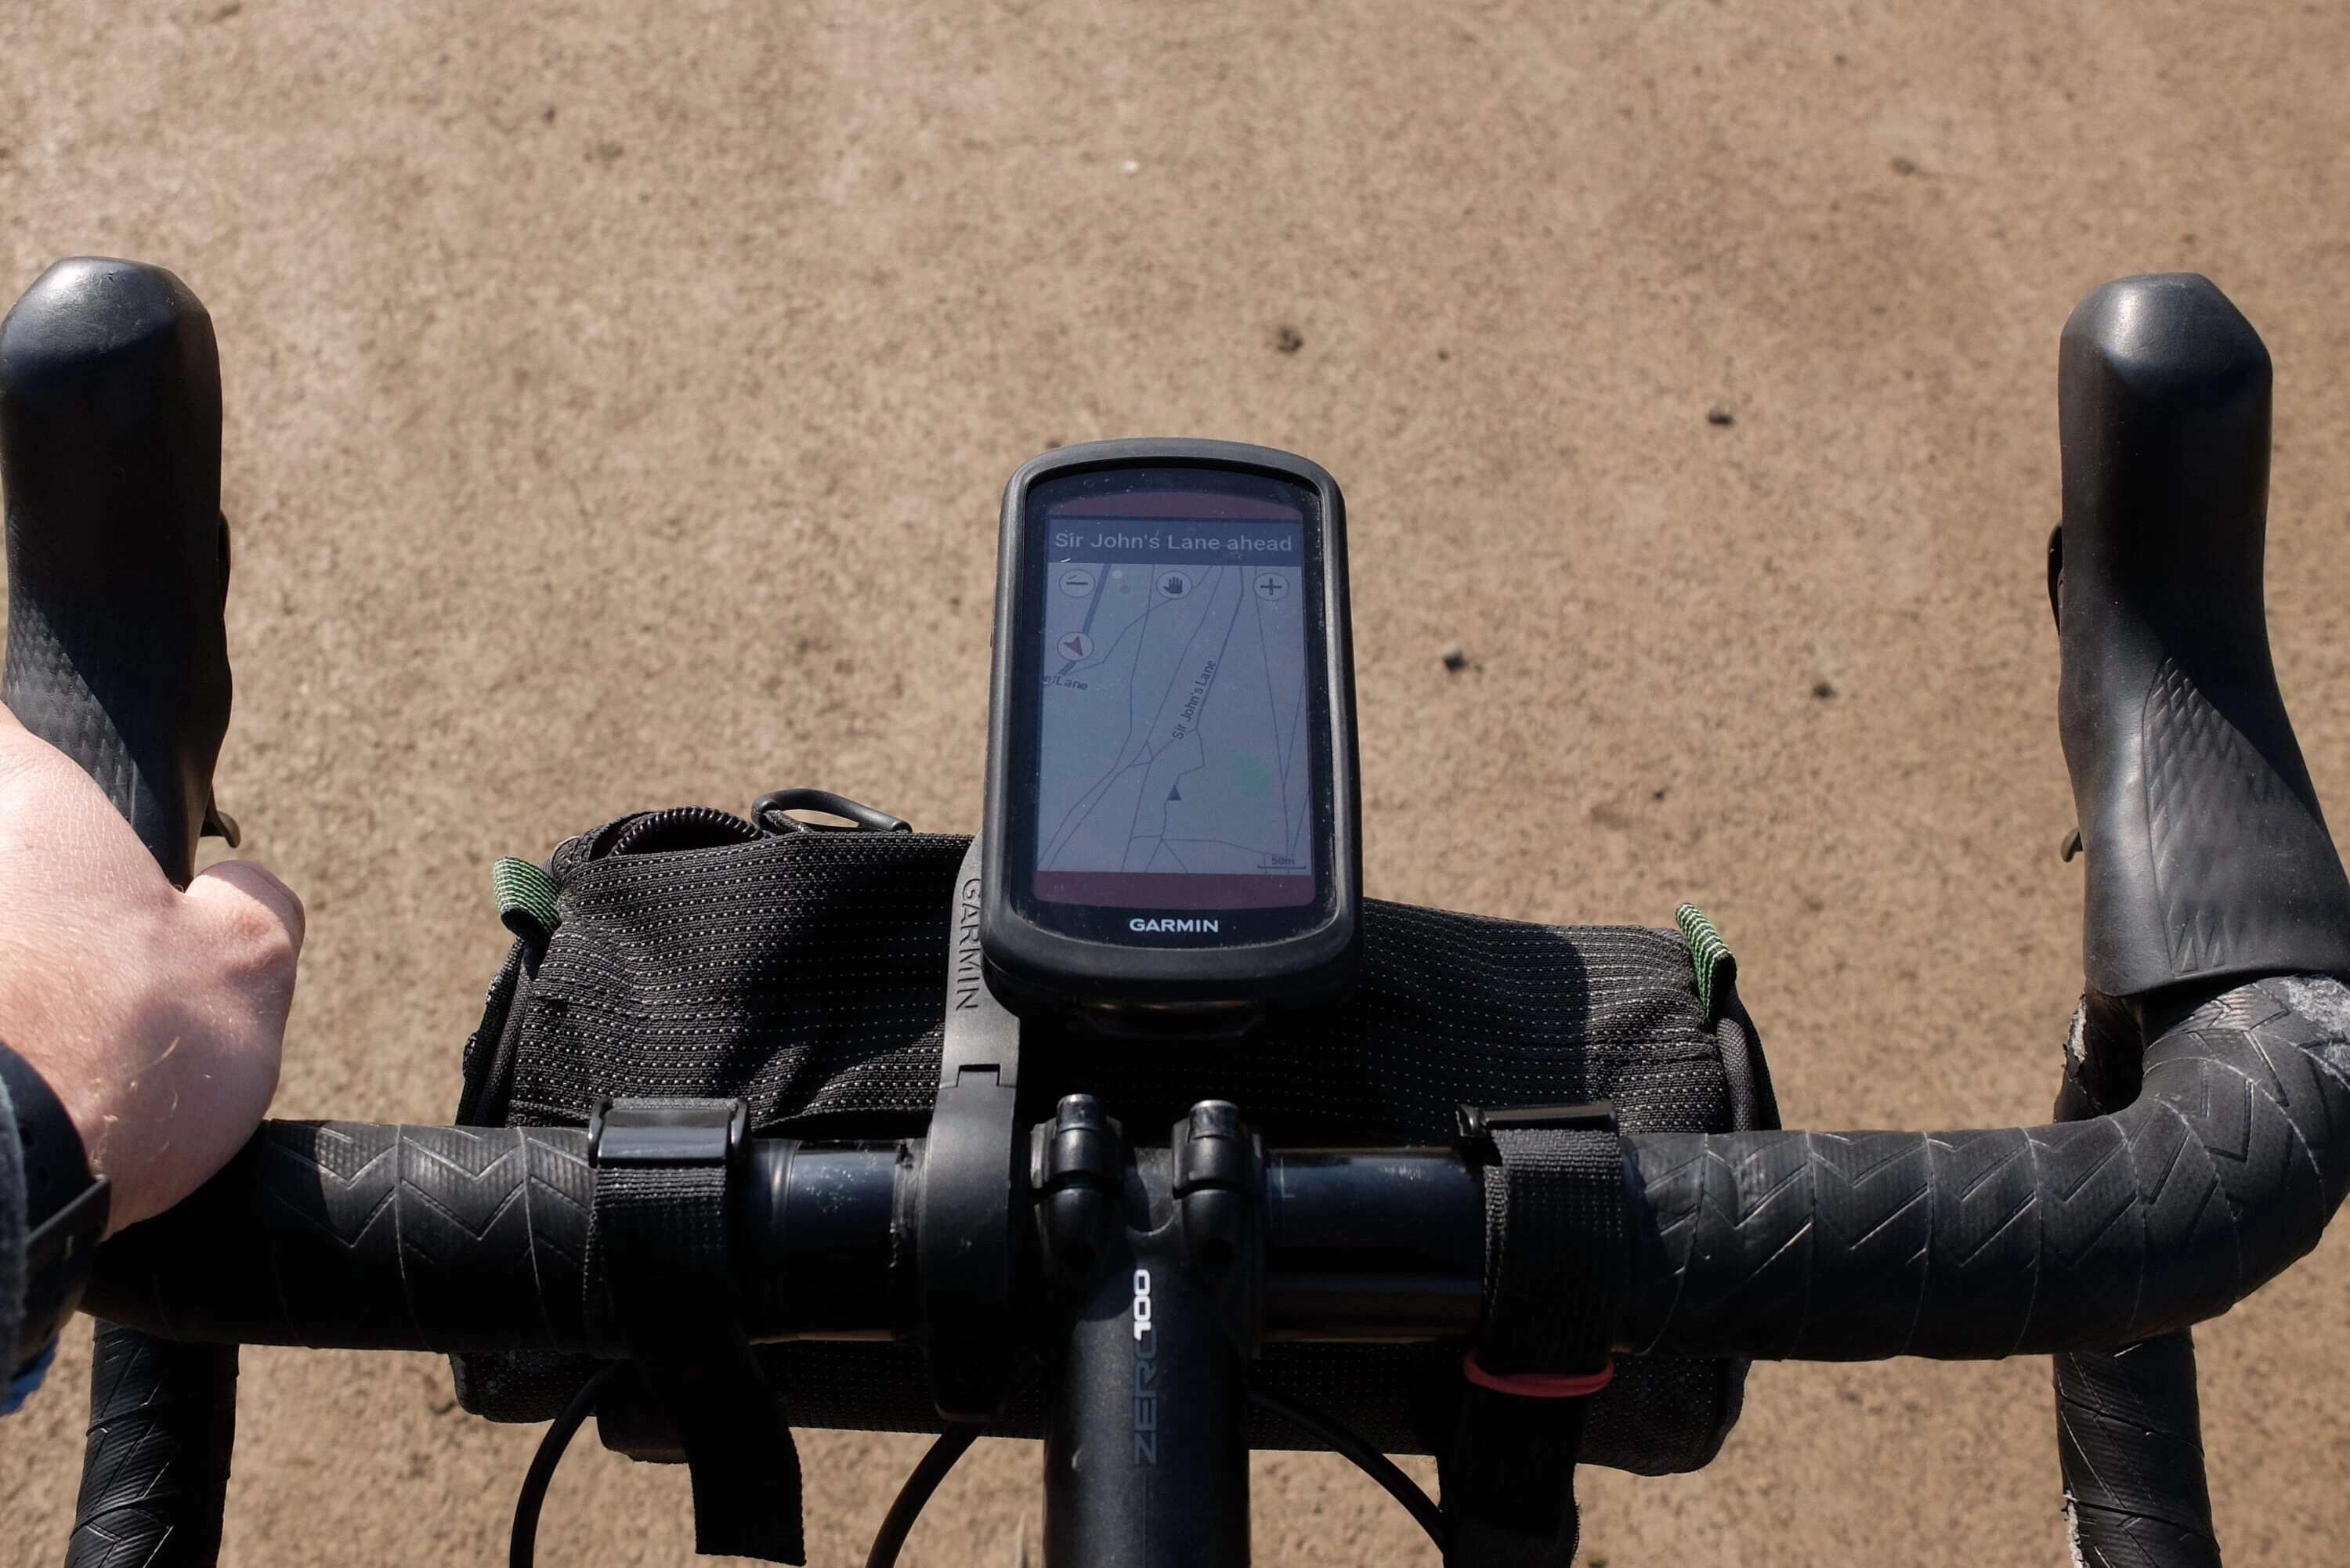 This is not a drill! The Garmin Edge 1040 has a massive discount